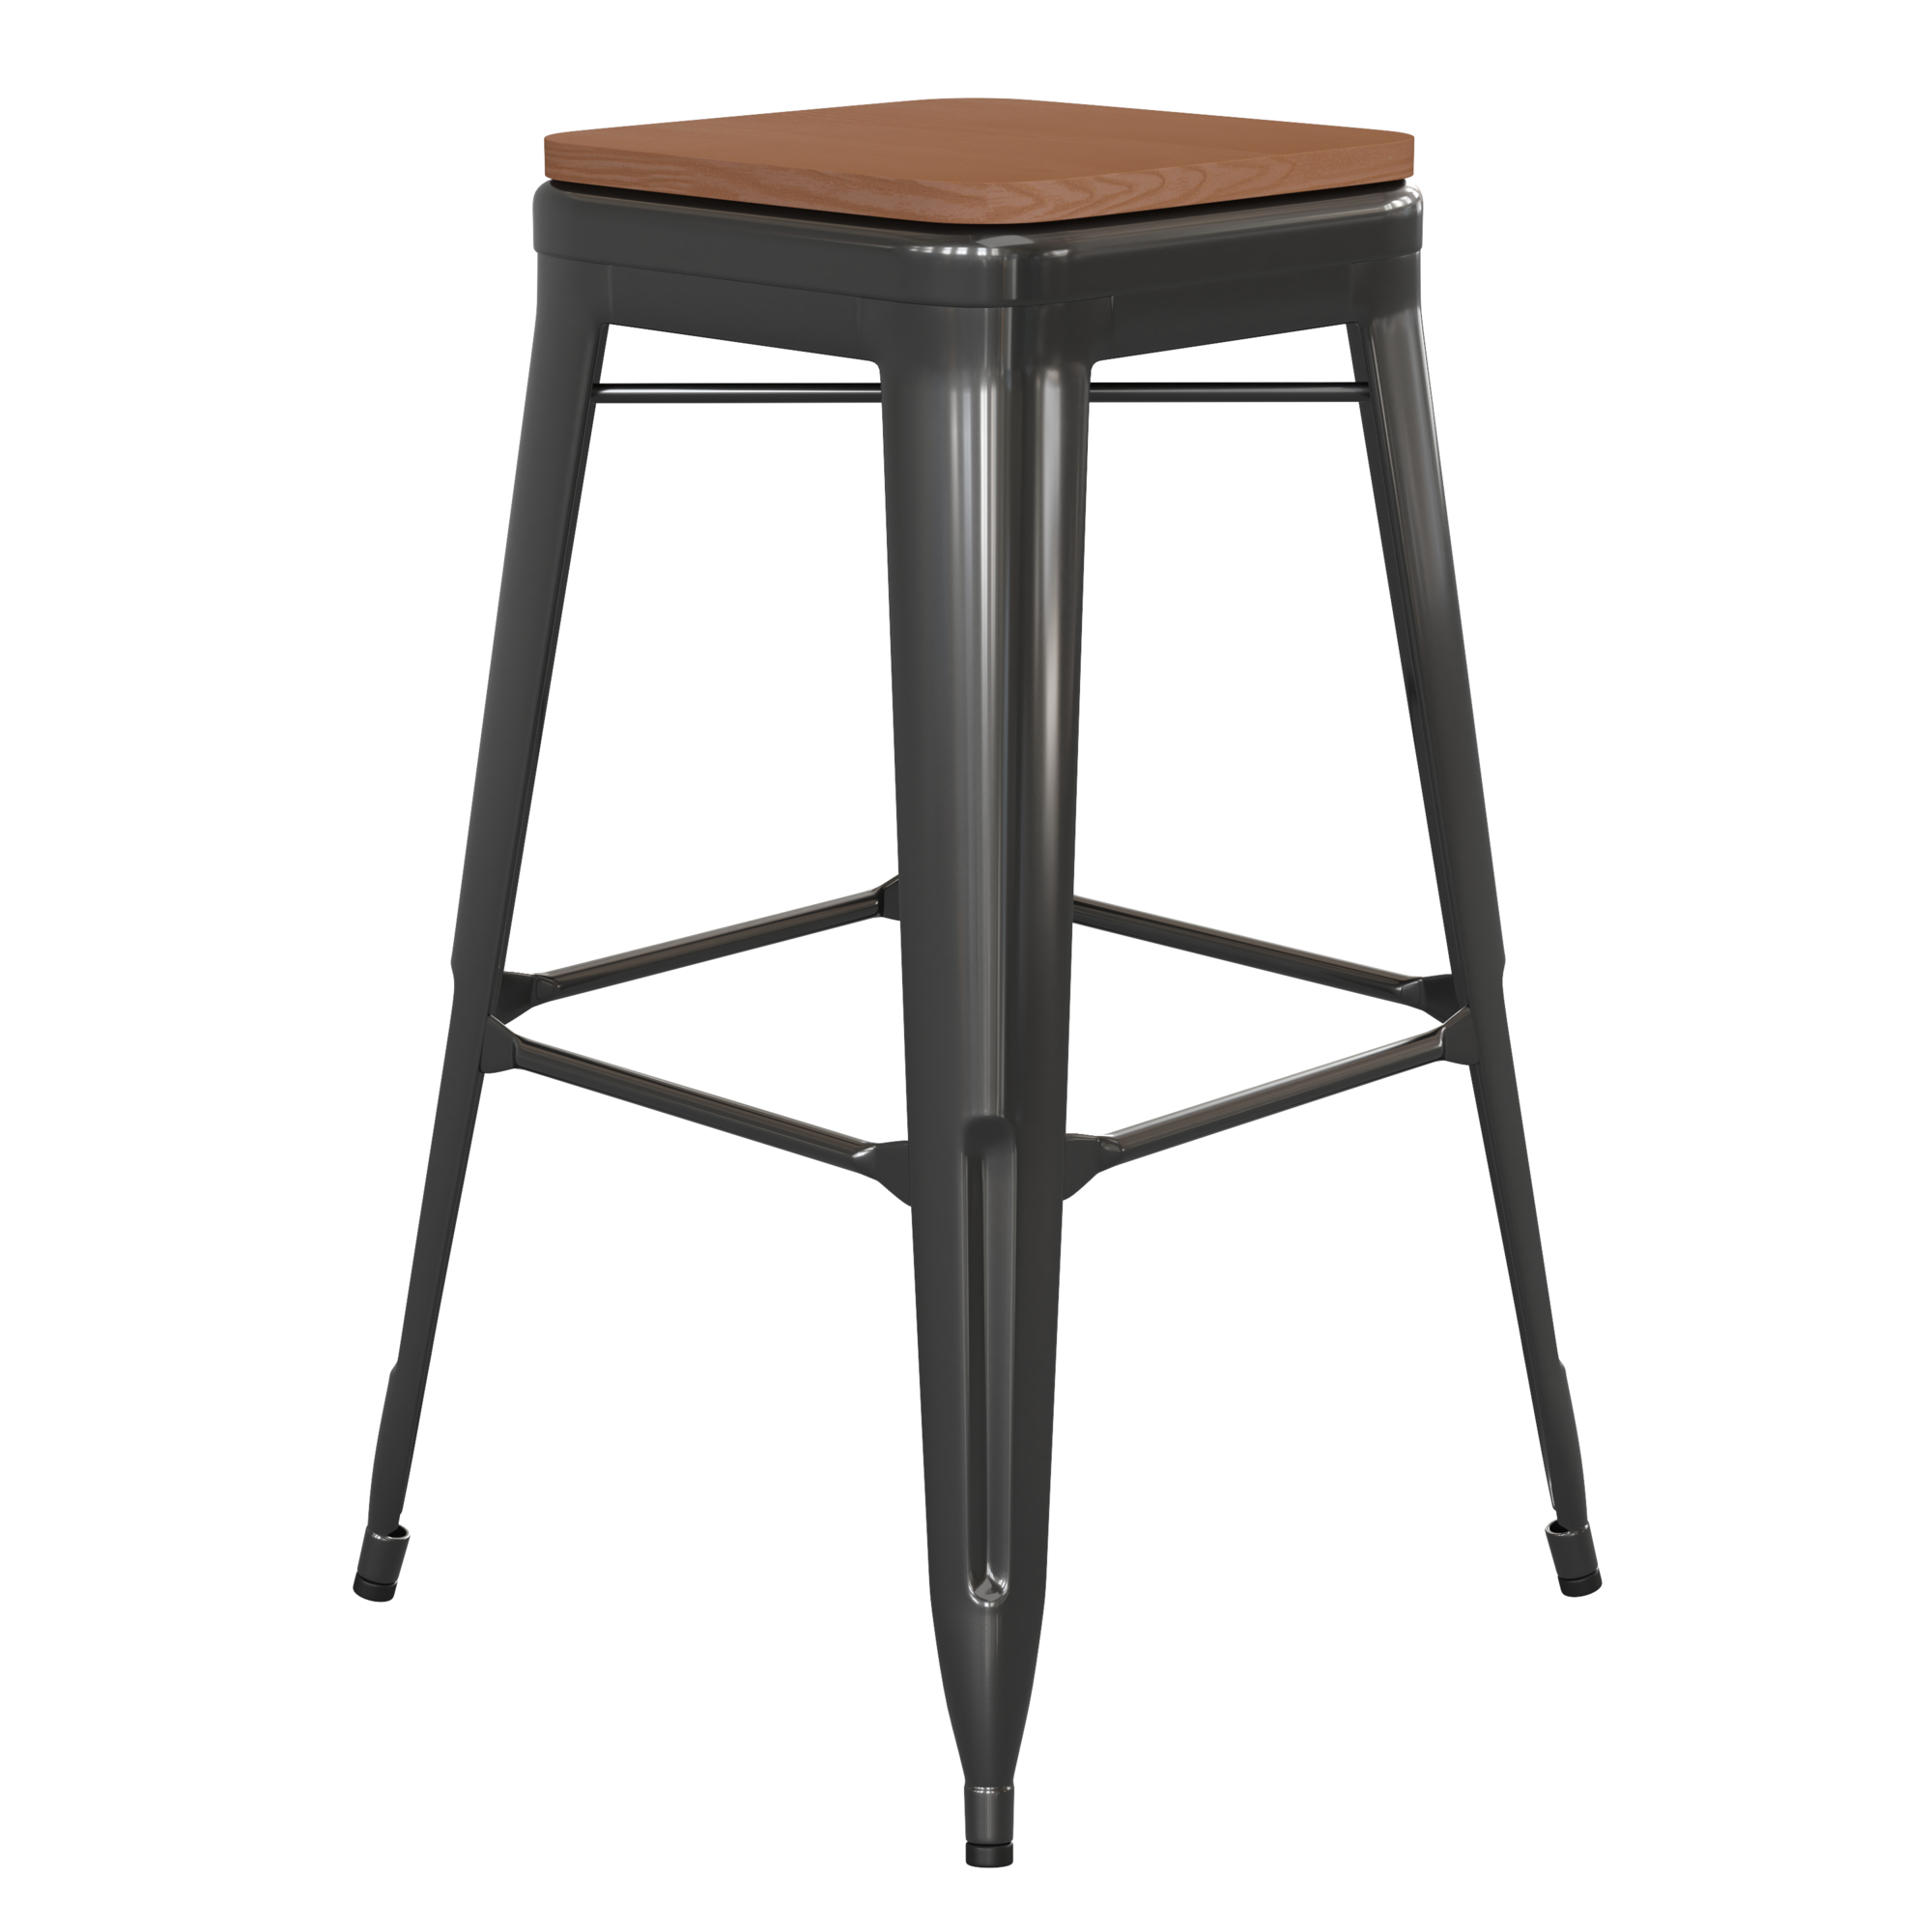 Flash Furniture, 30Inch Black Metal Stool-Teak Poly Seat, Primary Color Black, Included (qty.) 1, Model CH3132030BKPL2T